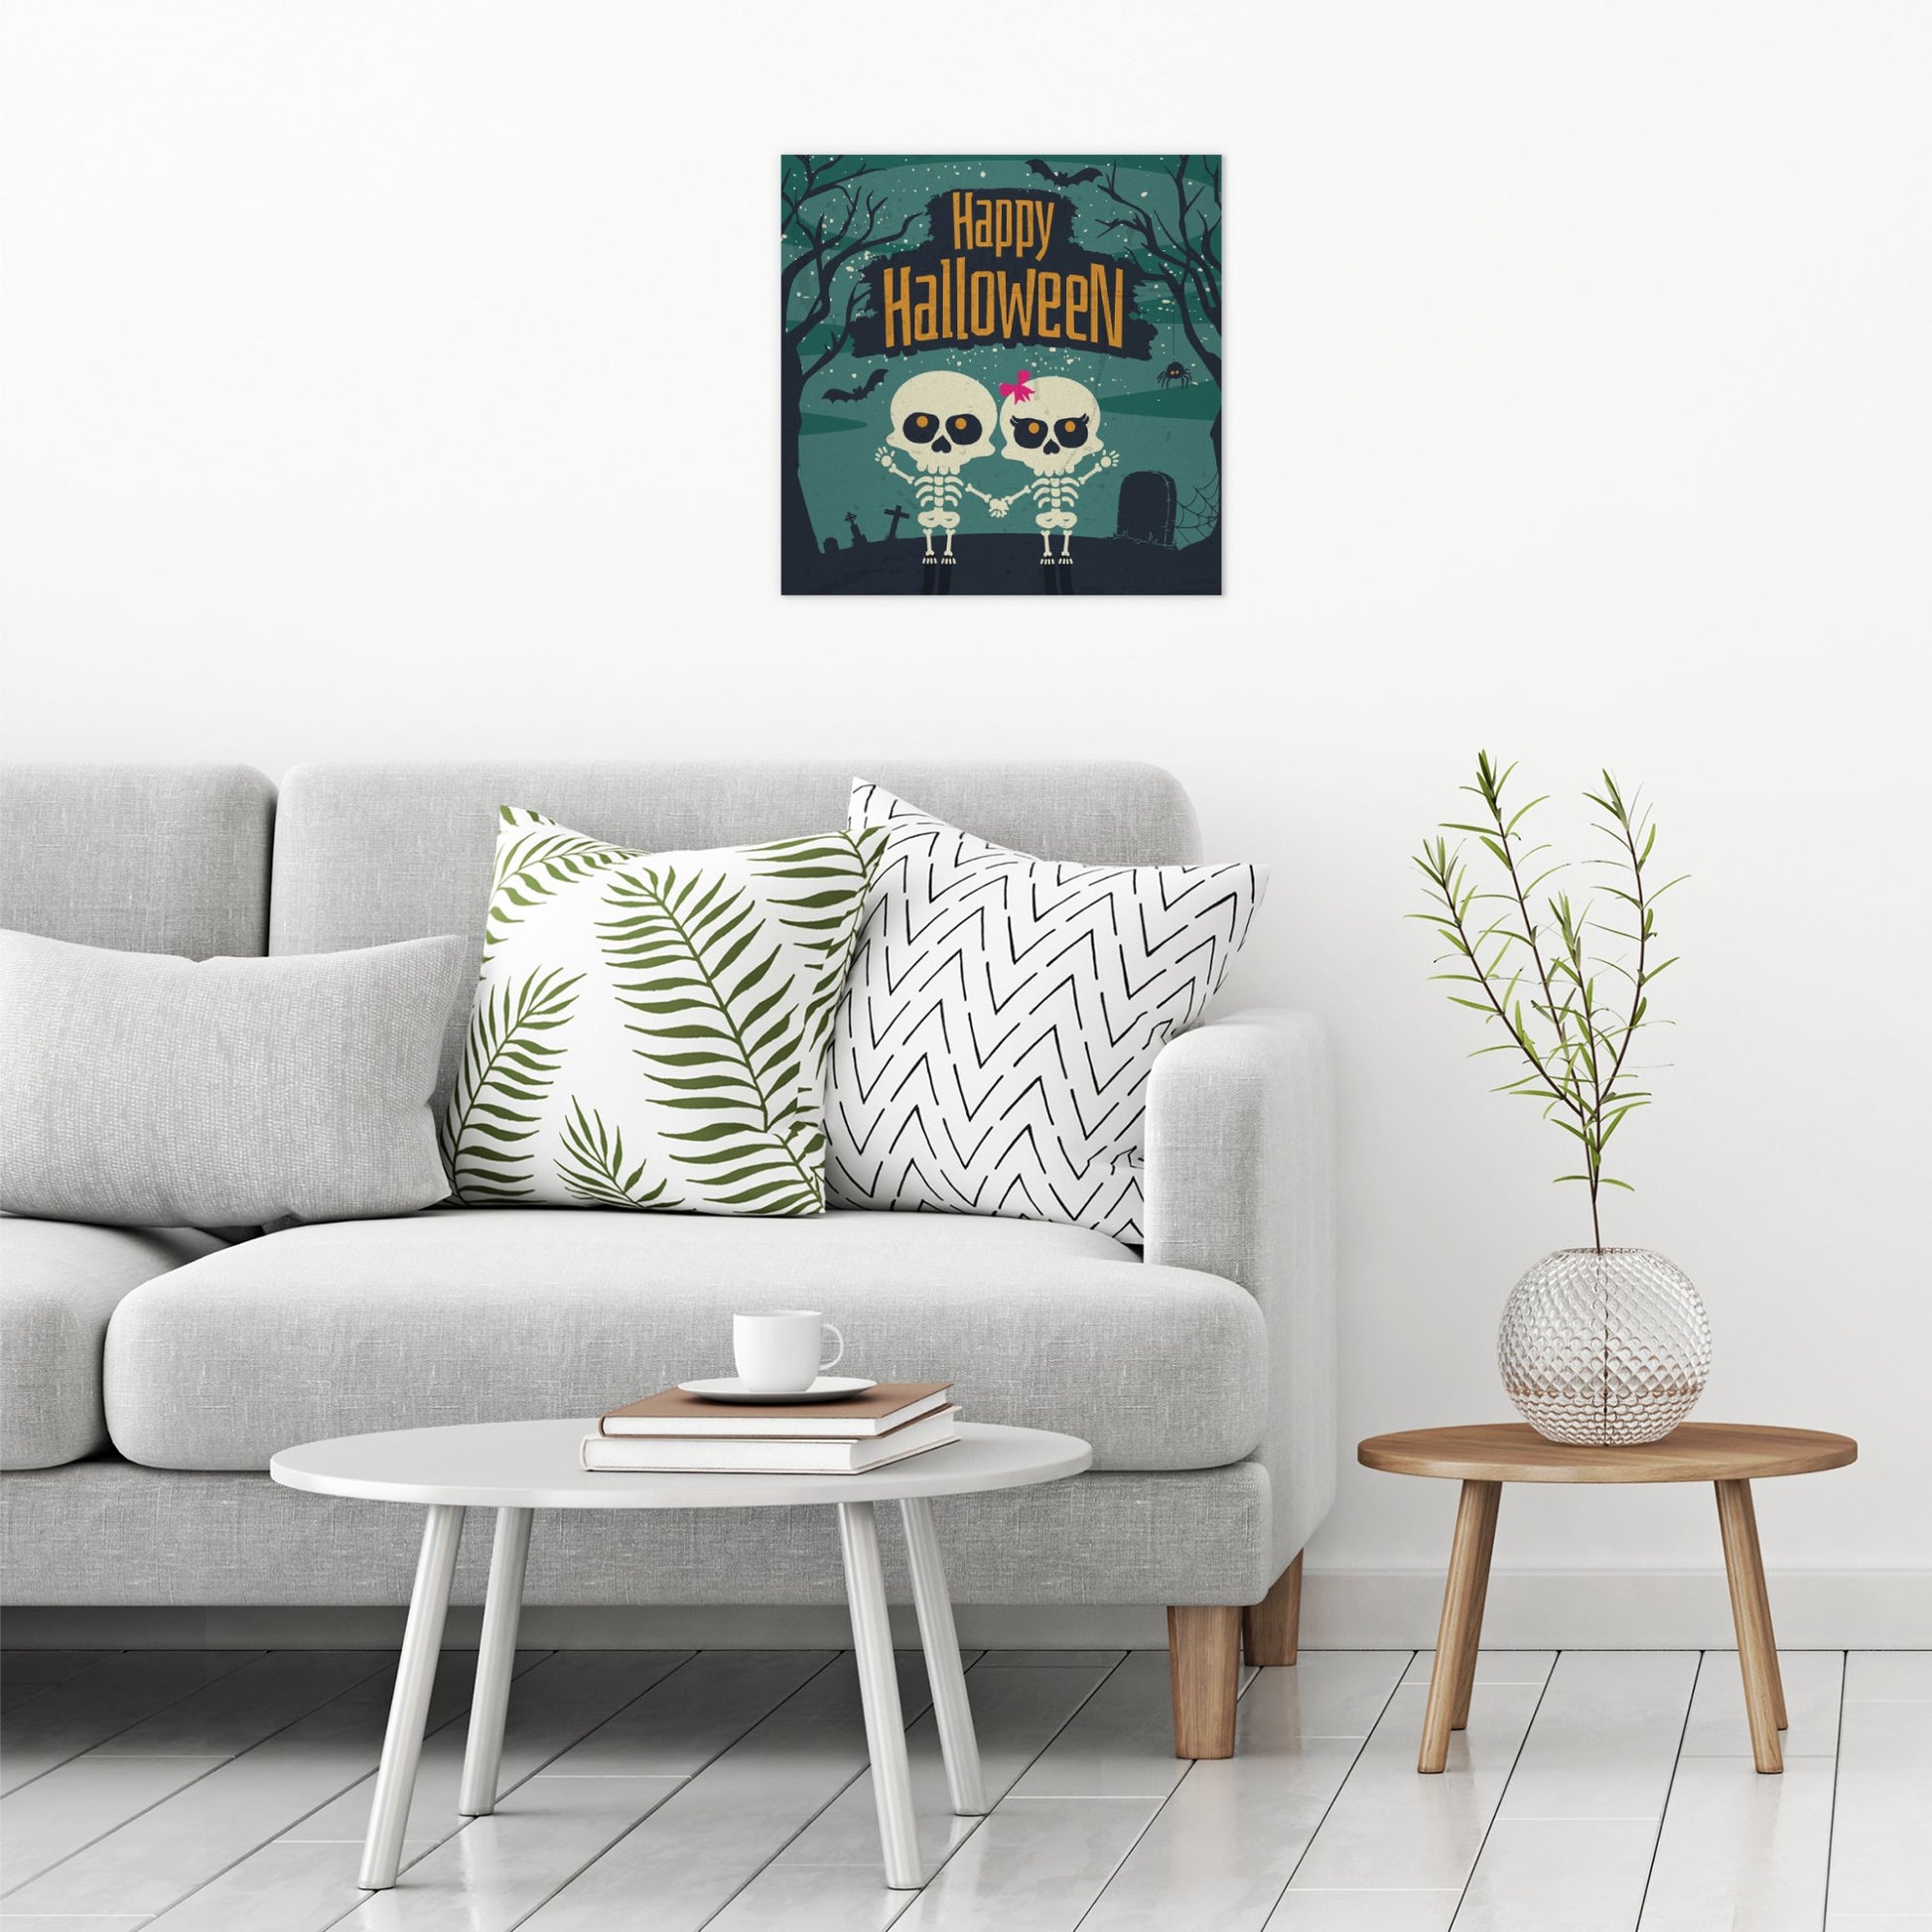 A contemporary modern room view showing a large size metal art poster display plate with printed design of a Happy Halloween Cute Skeletons